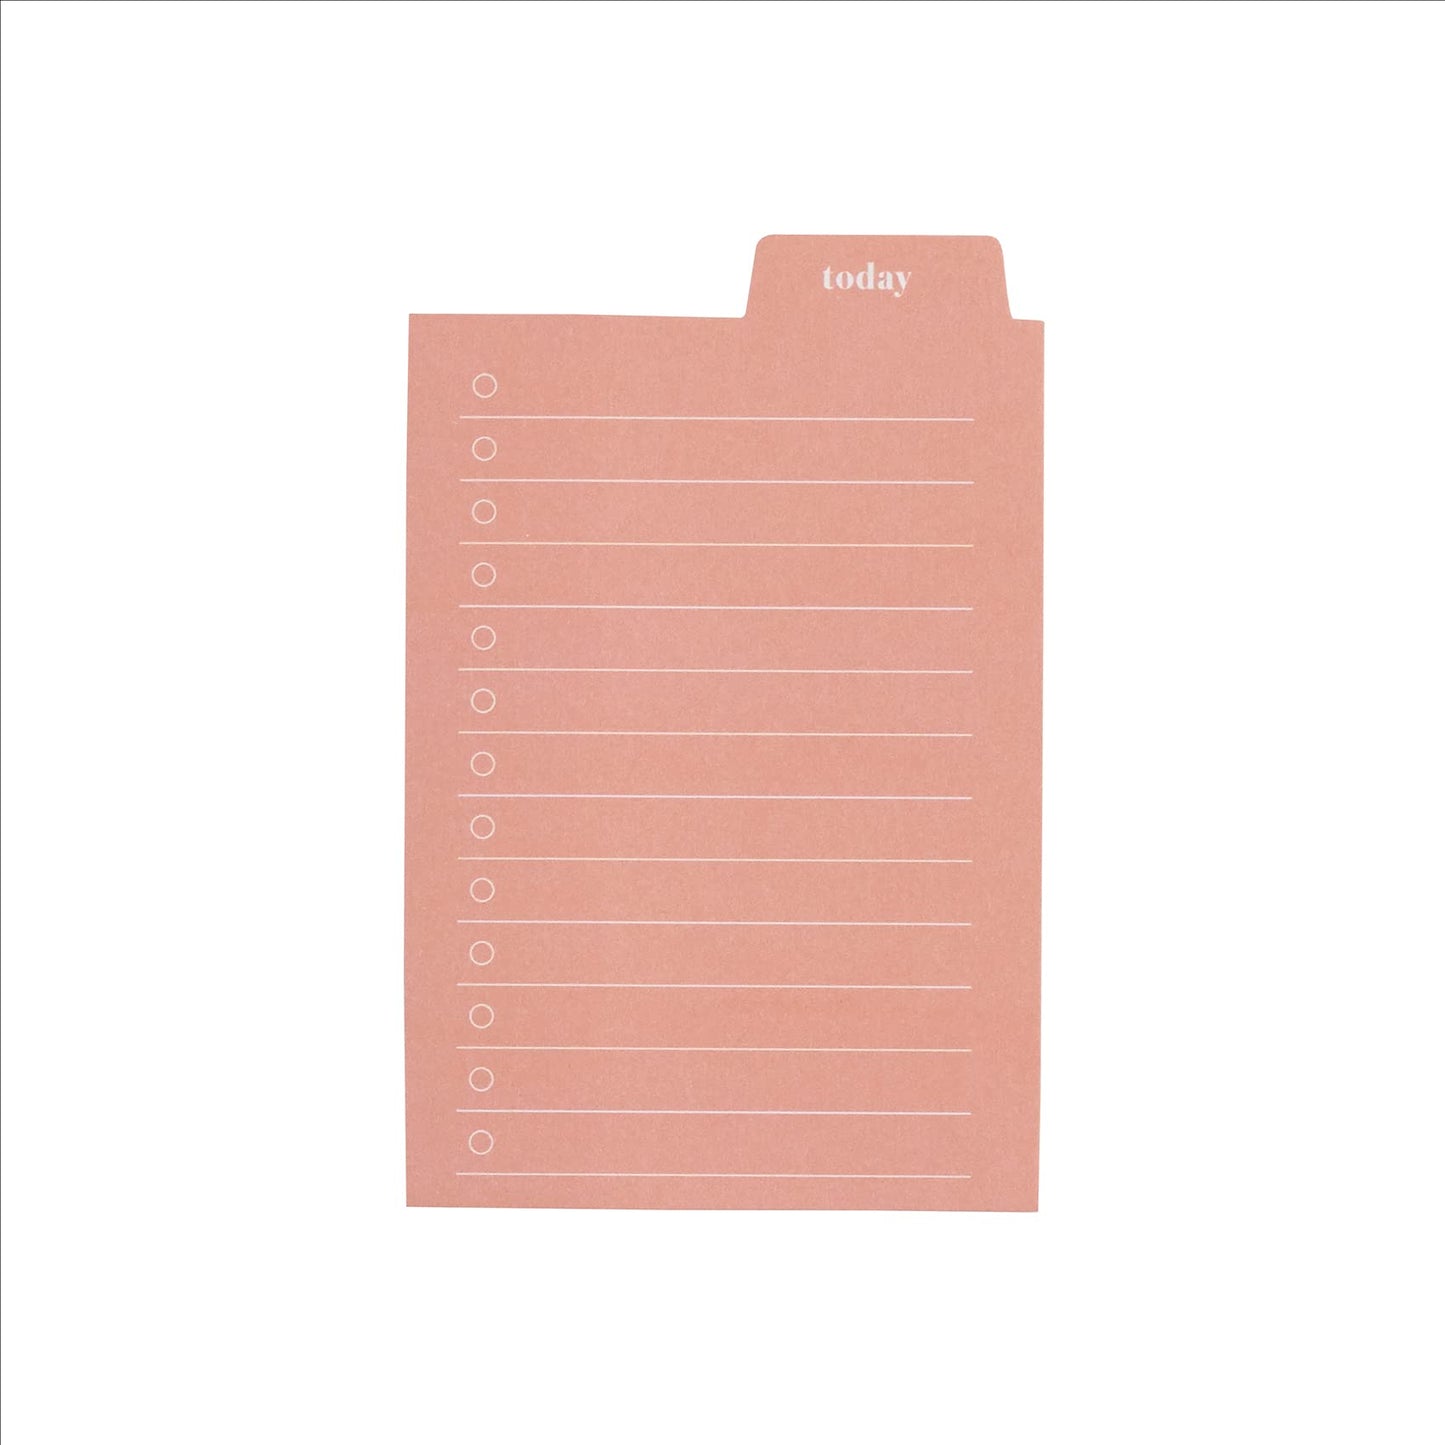 Tabbed Sticky Notes - Daily Checklist - The Crowd Went Wild